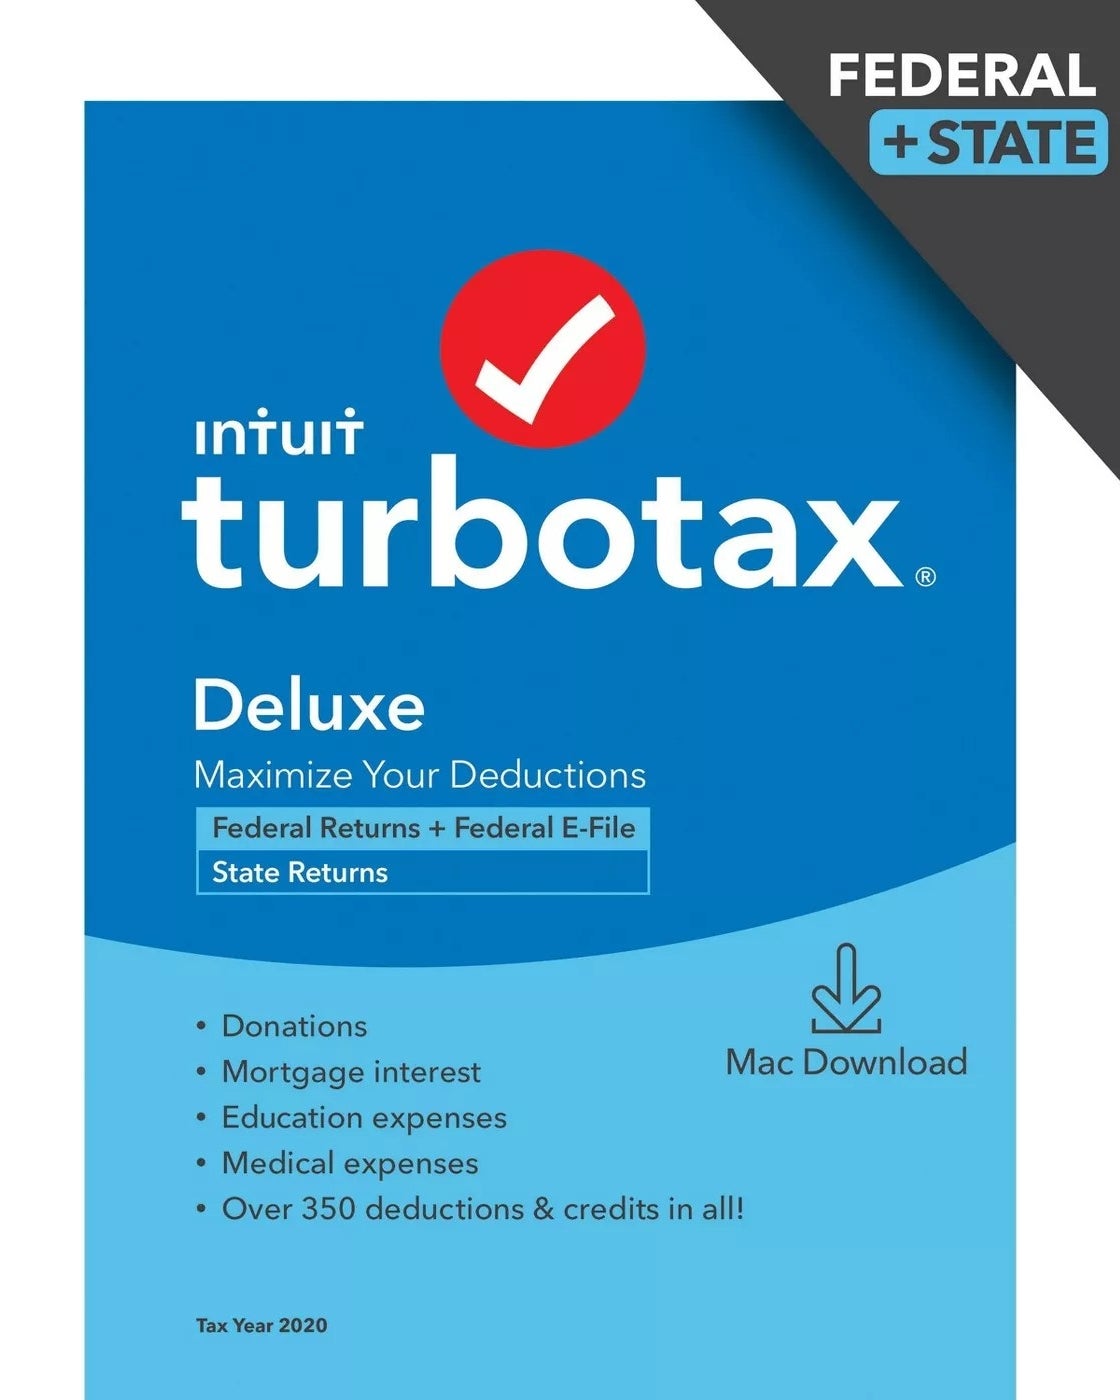 Federal+State Intuit TurboTax Deluxe maximizes your deductions which includes over 350 deductions and credits 